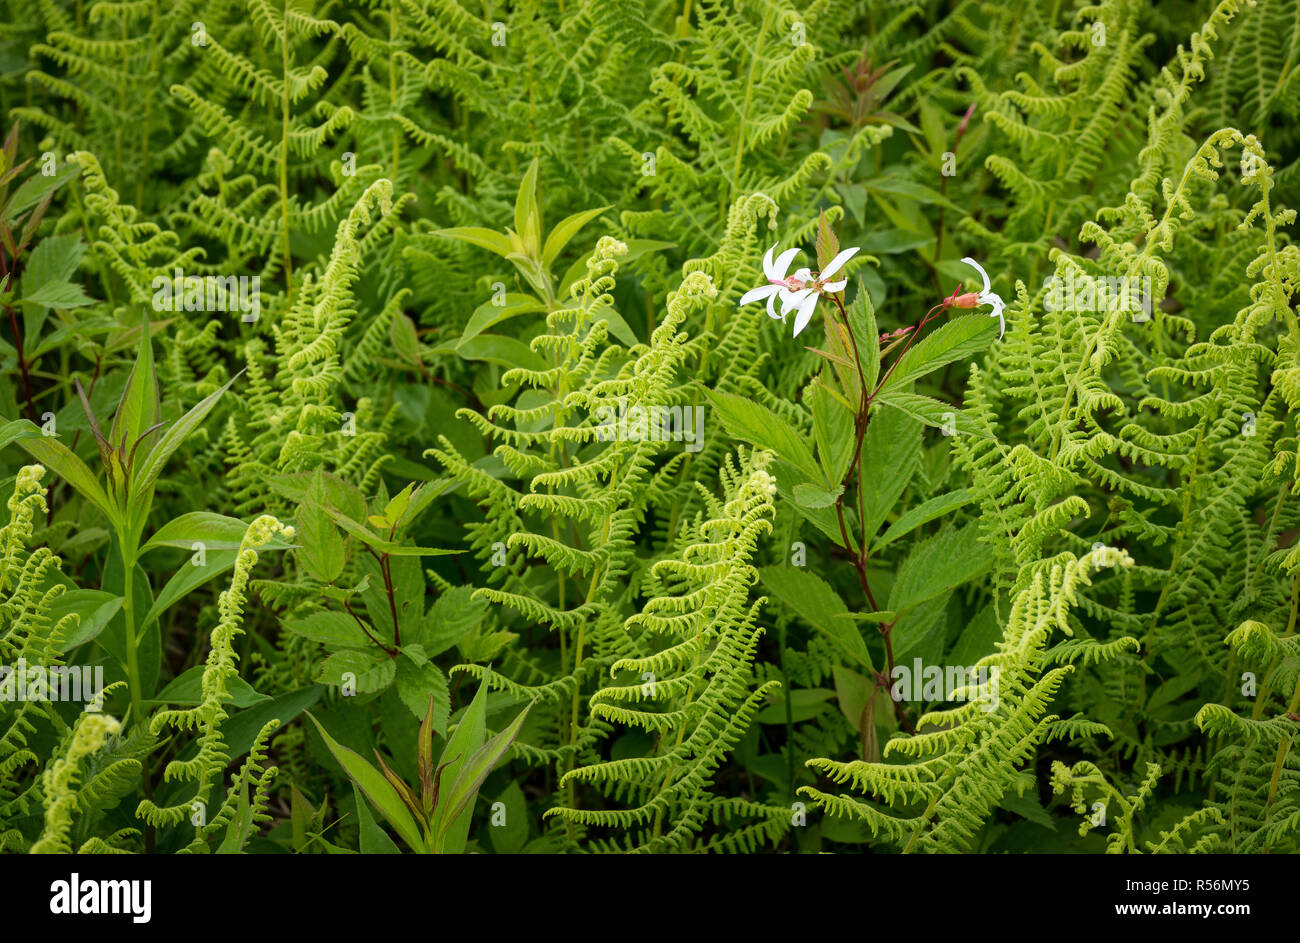 Bowman's root flowers blooming among hay-scented ferns in Big Meadows of Shenandoah National Park, Virginia. Stock Photo